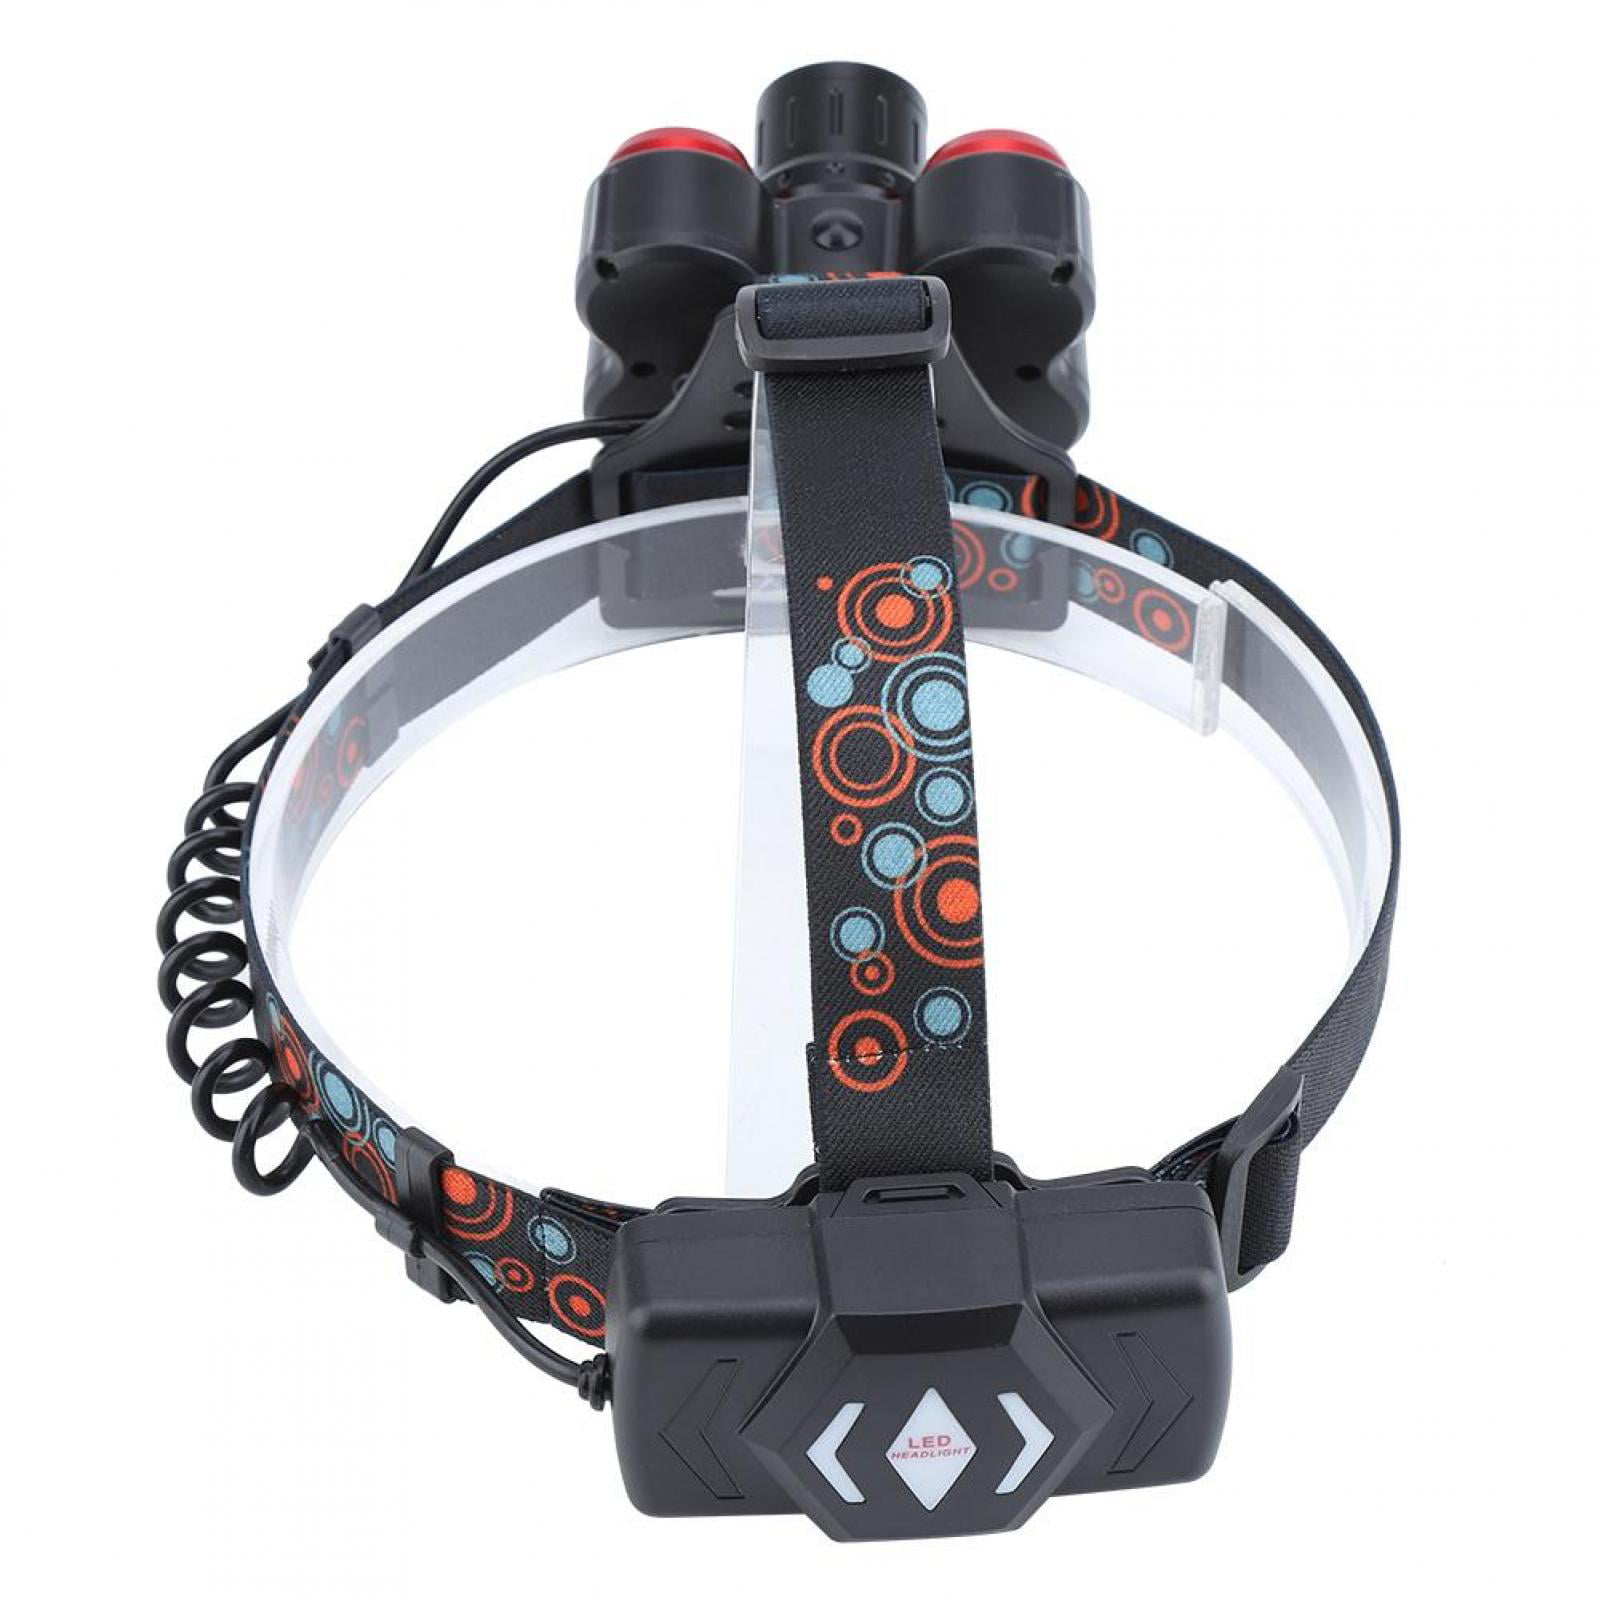 LED Headlamp Battery Operated 28 Lu... Adjustable Headband for Kids and Adults 